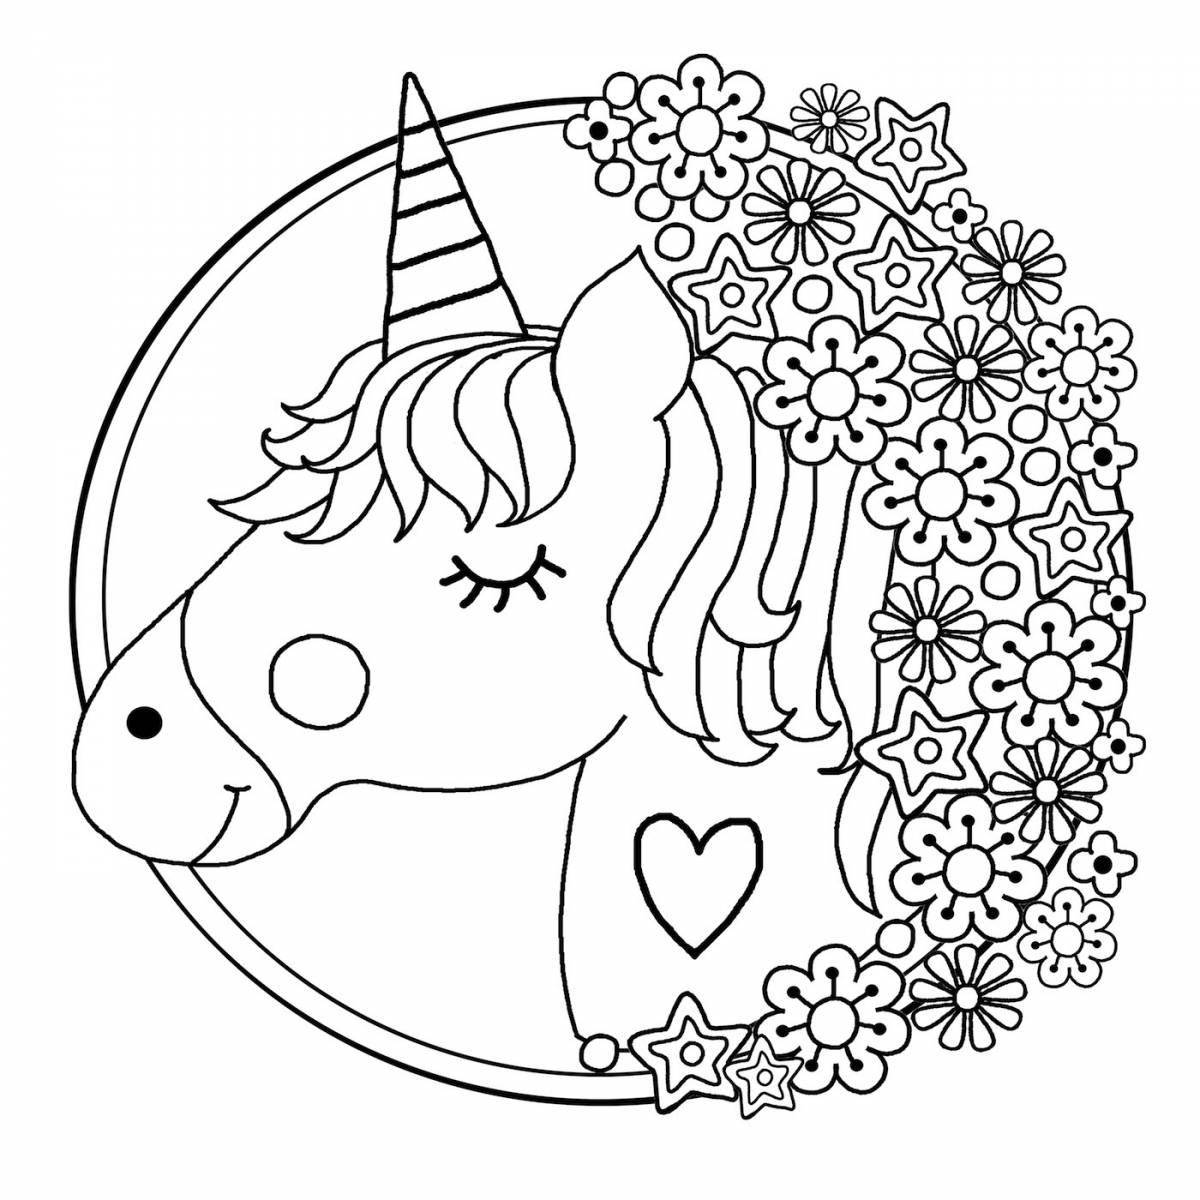 Radiant coloring page unicorn with watermelon